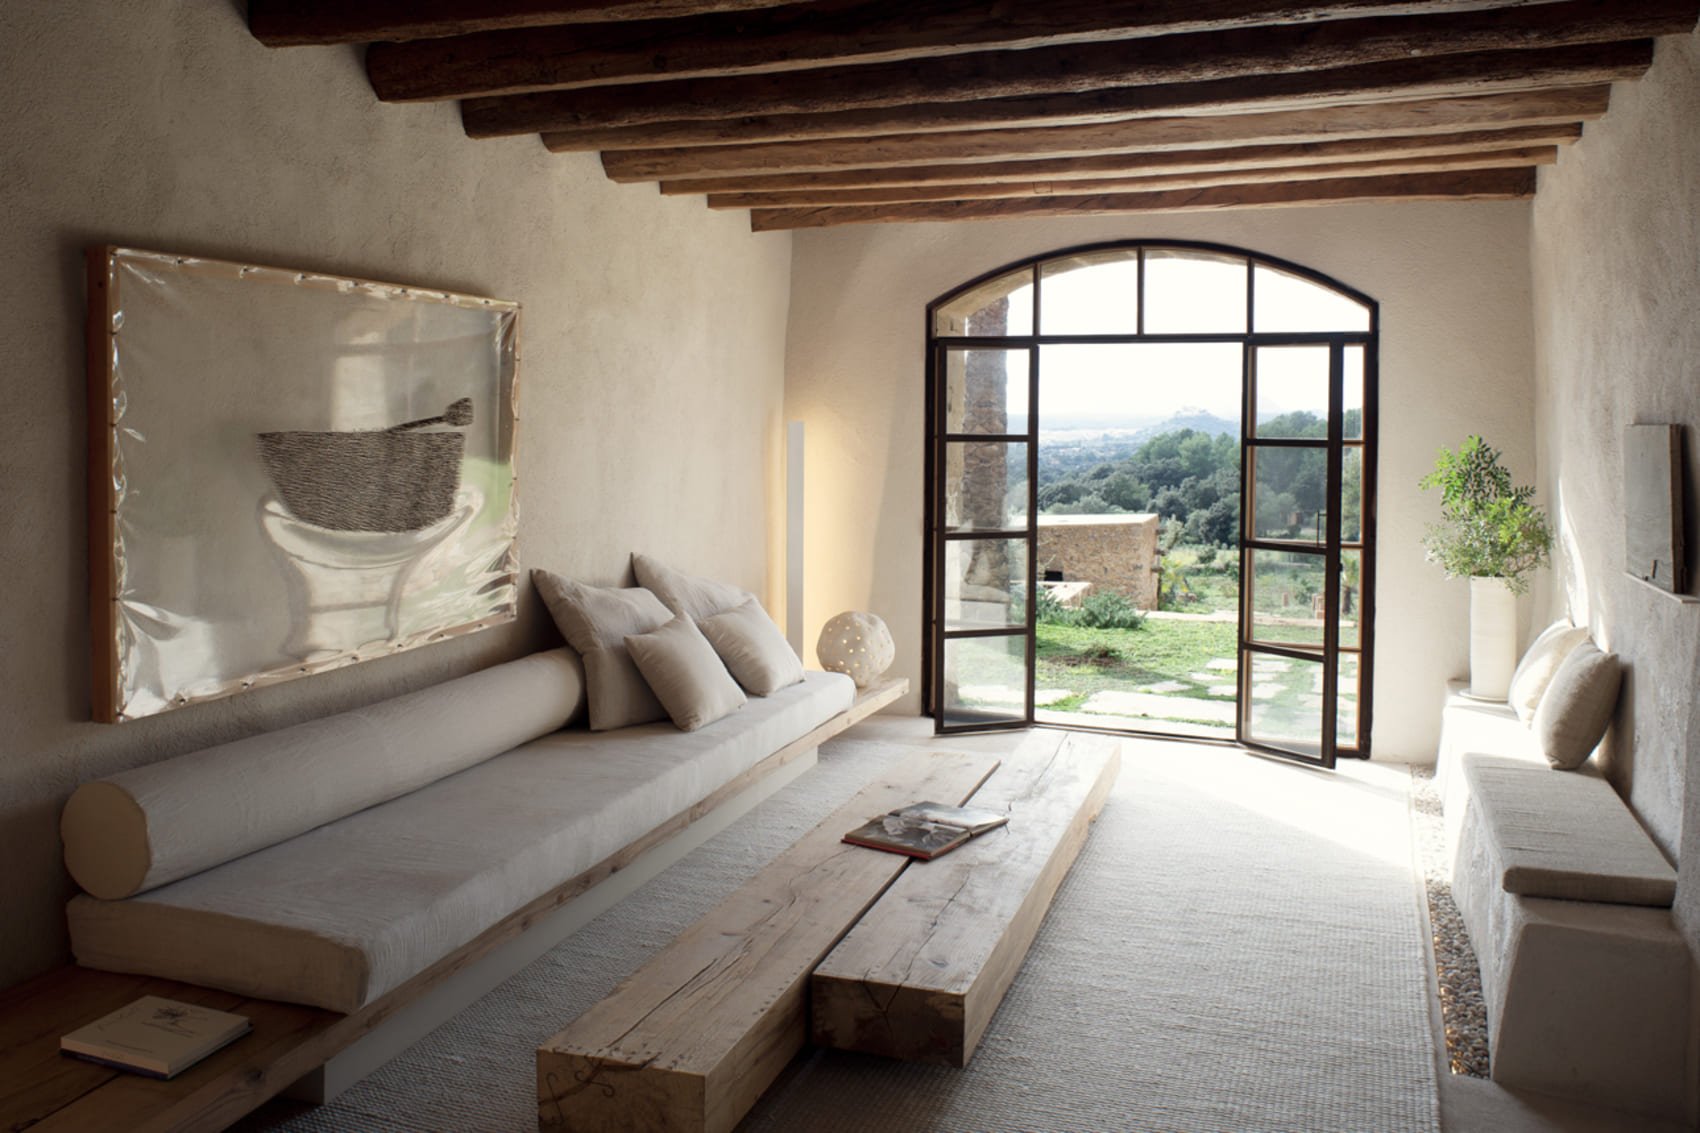 Best luxury eco boutique hotel with pool, spa, restaurant 5* Mallorca Spain - Es Raco d'Arta - hall